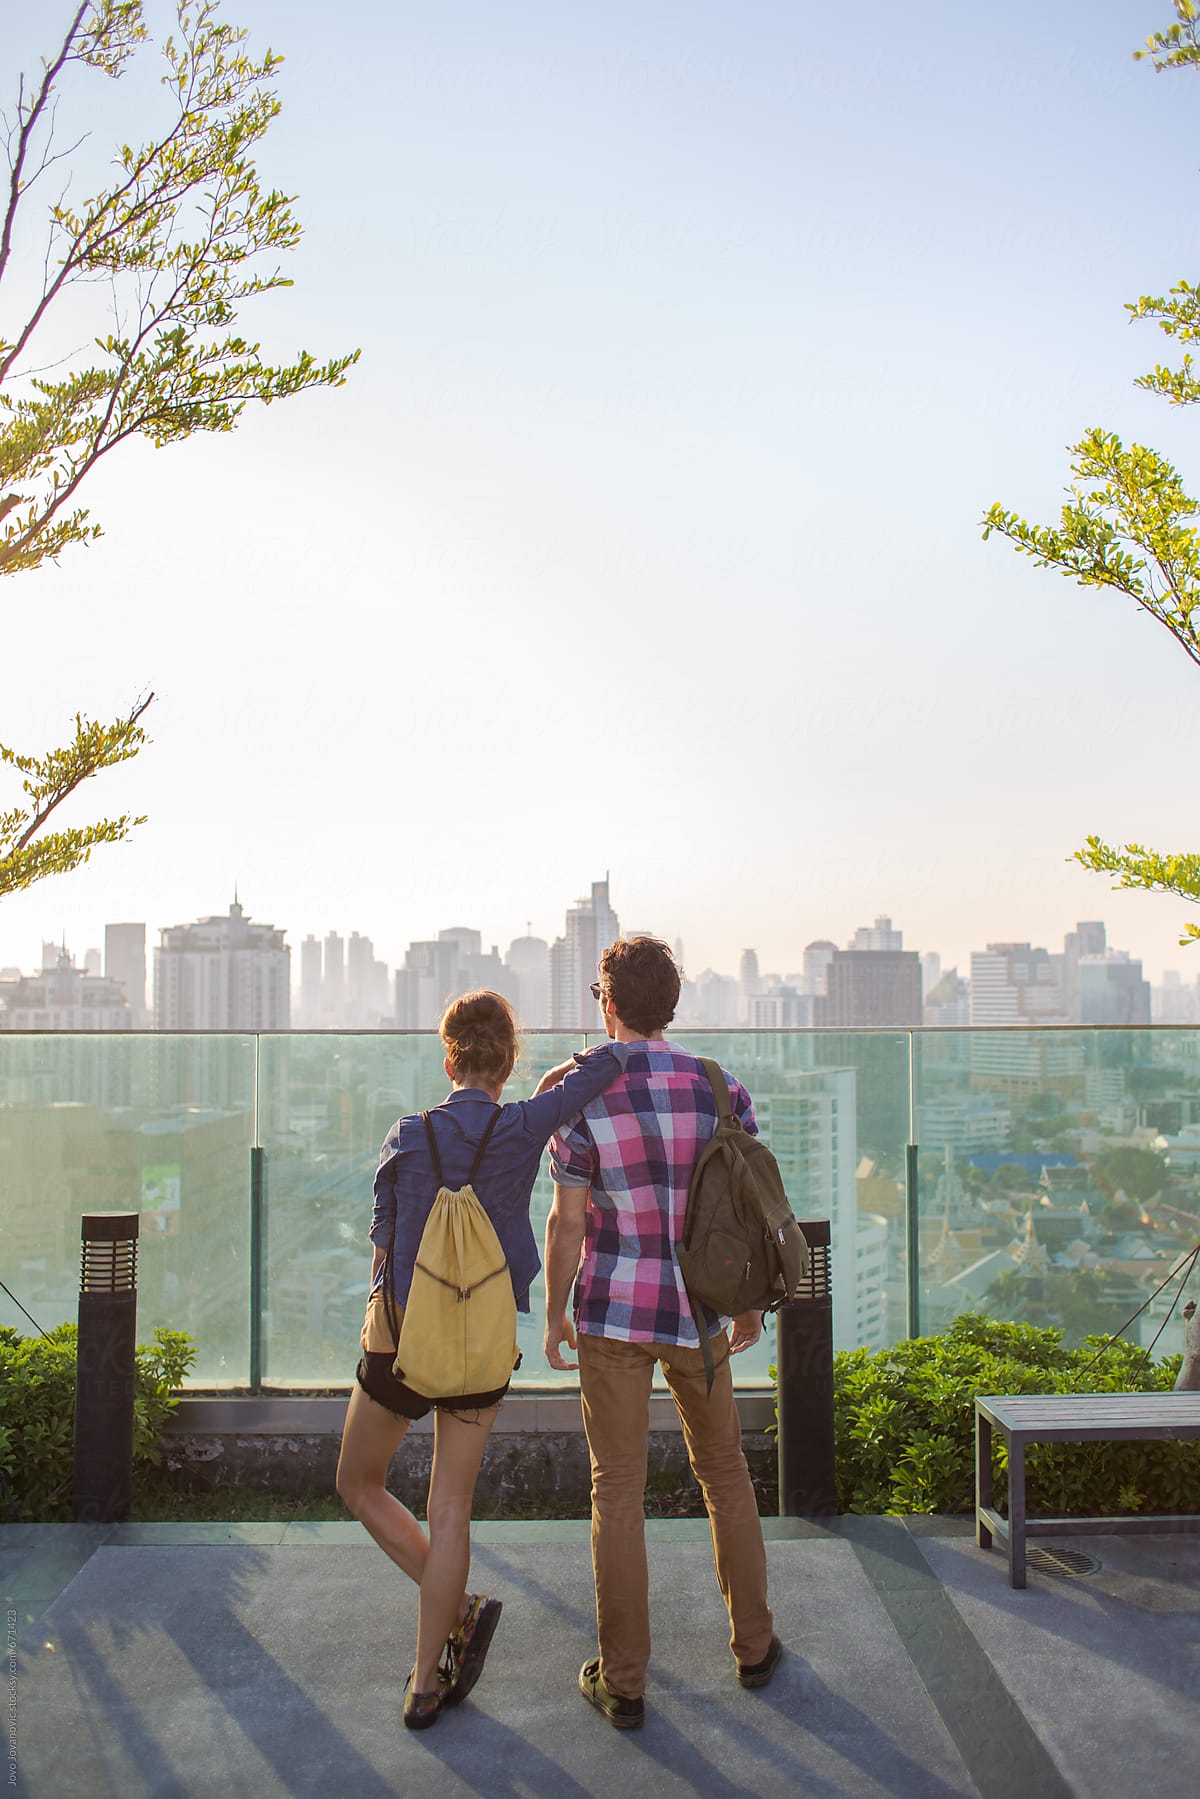 Friends Standing Together Looking At The City View By Stocksy Contributor Jovo Jovanovic